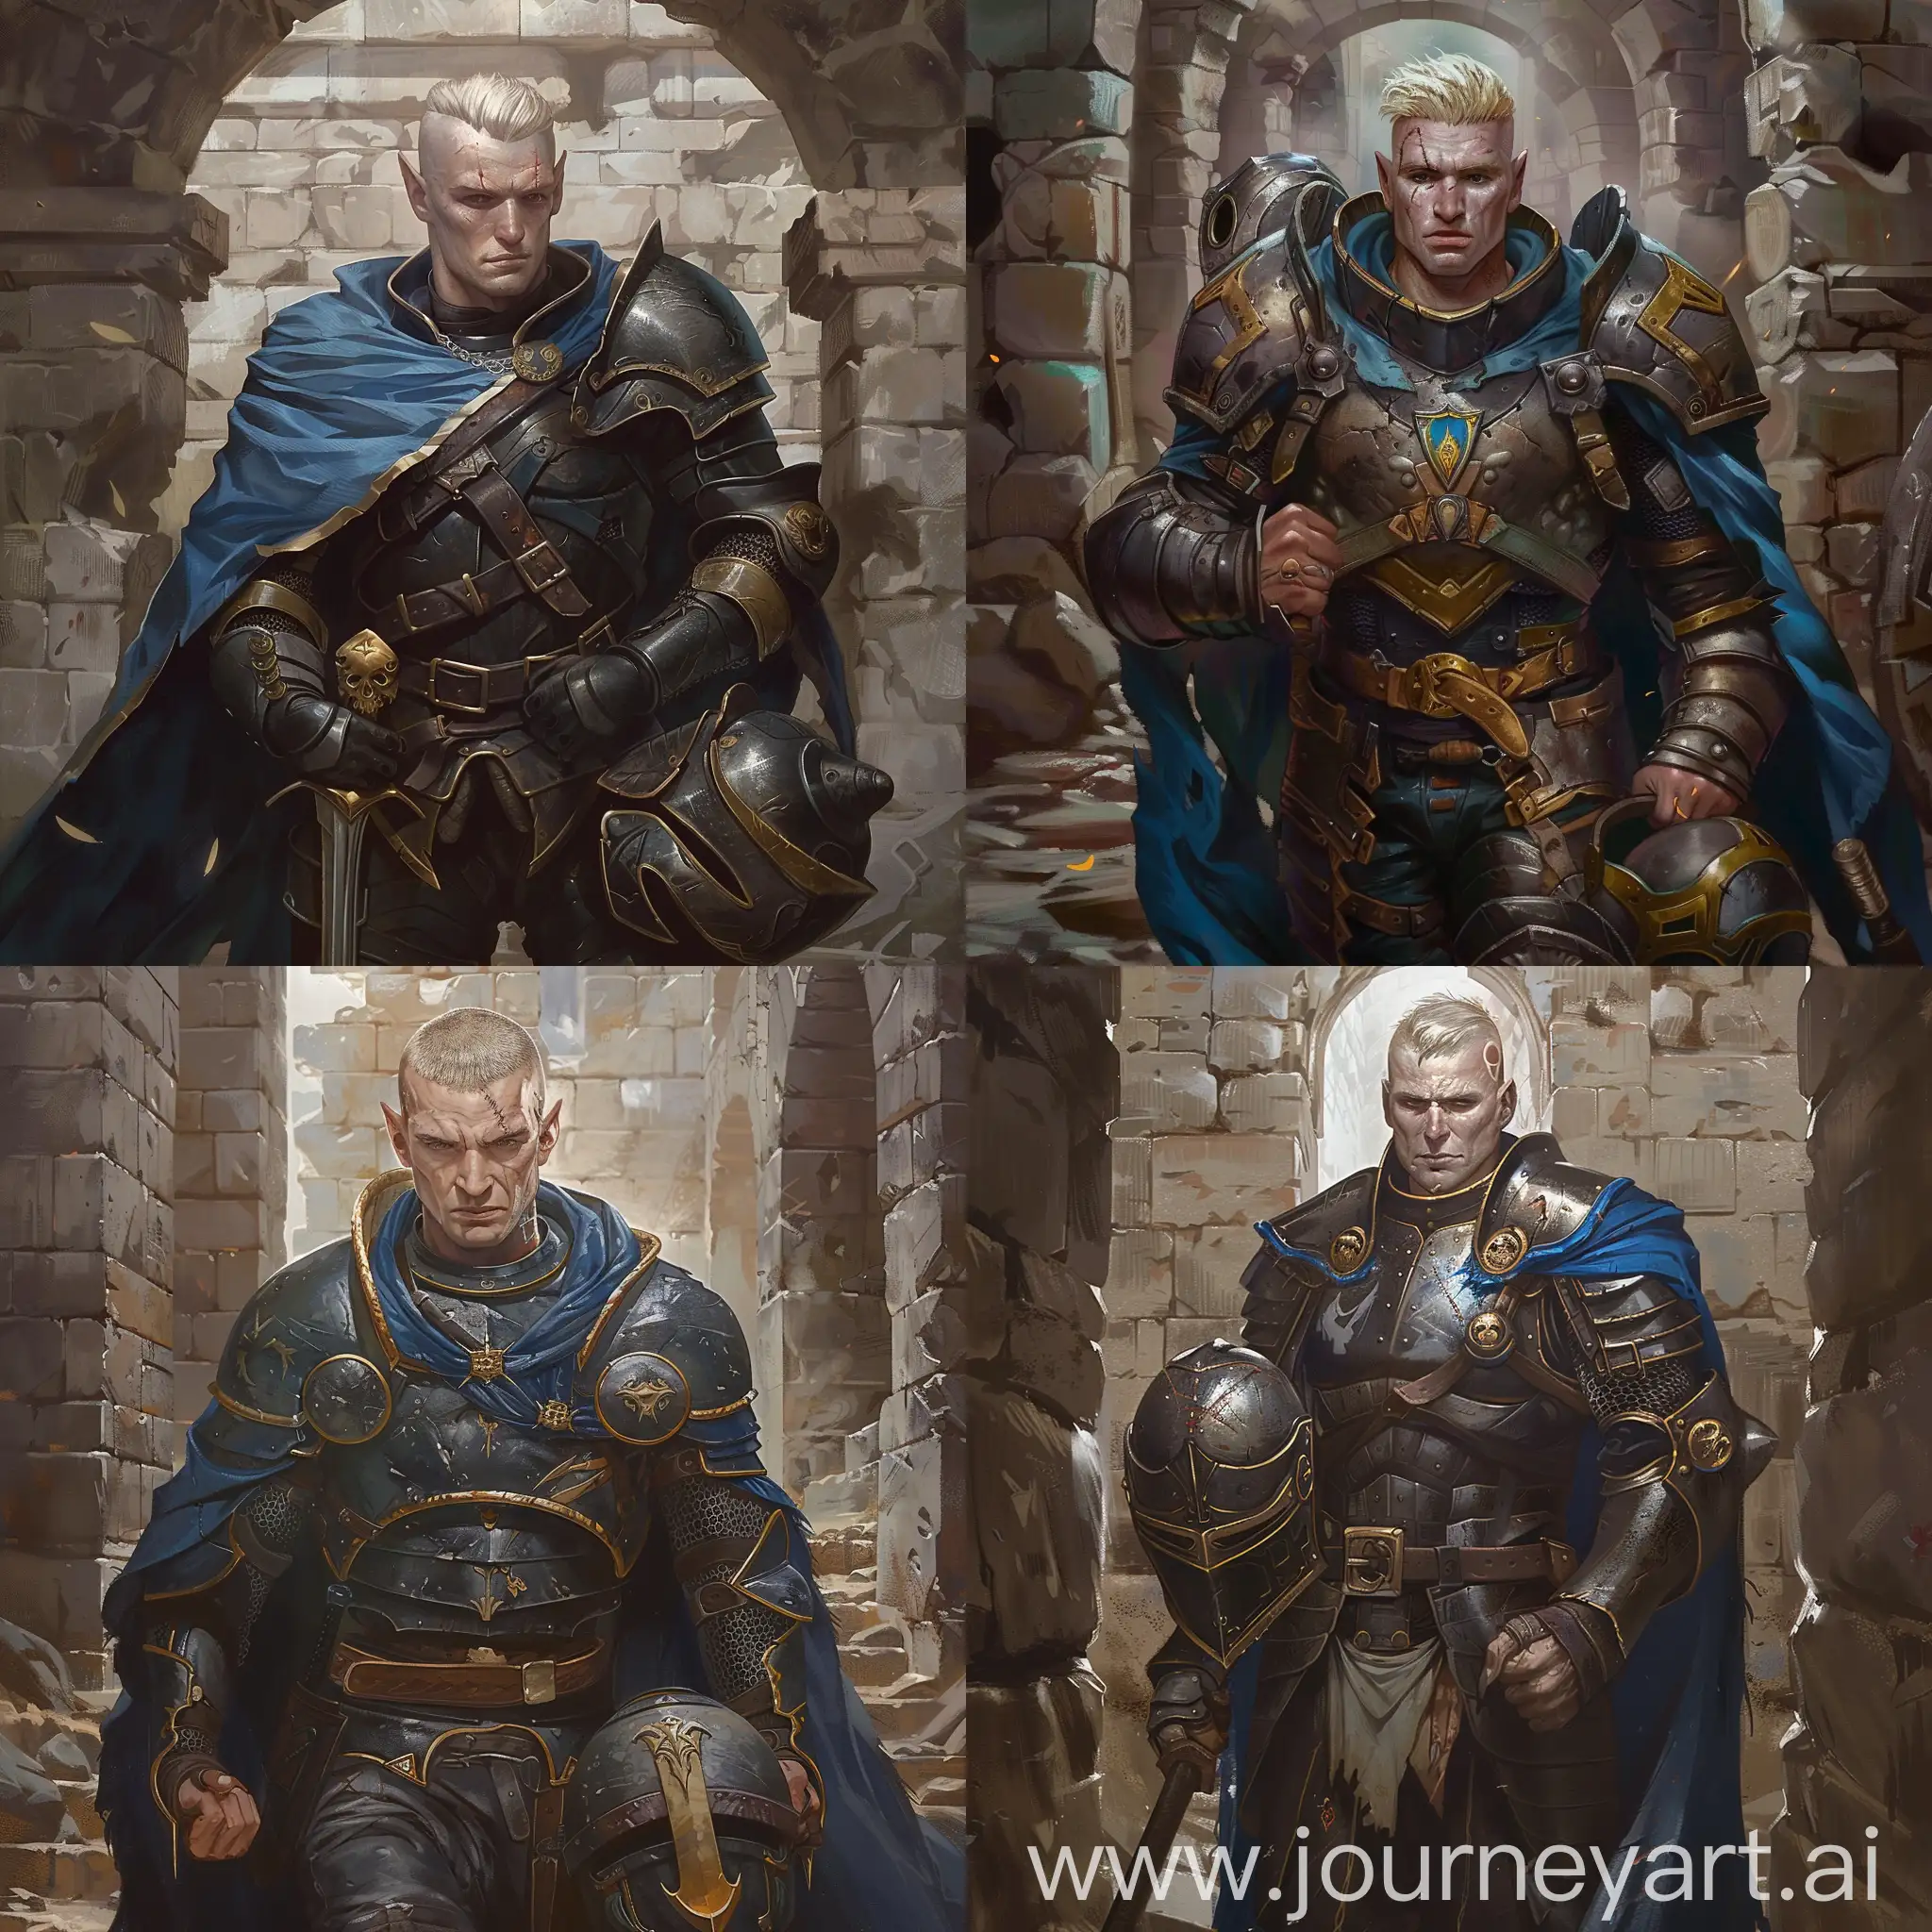 Draw a realistic art of character from the "Pathfinder: Wrath of the Righteous" video game according to the following description:
He is a tall athletic human paladin. He has pale blond hair with medieval monk bowl haircut. His rugged face of a grizzled veteran is clean shaven. He has a large scar over his face.
He wears a full suit of medieval crusader armor with helmet in his hands. Armor is black with gold trim, with blue cape over the shoulders.
He is making his way through a stone fortress